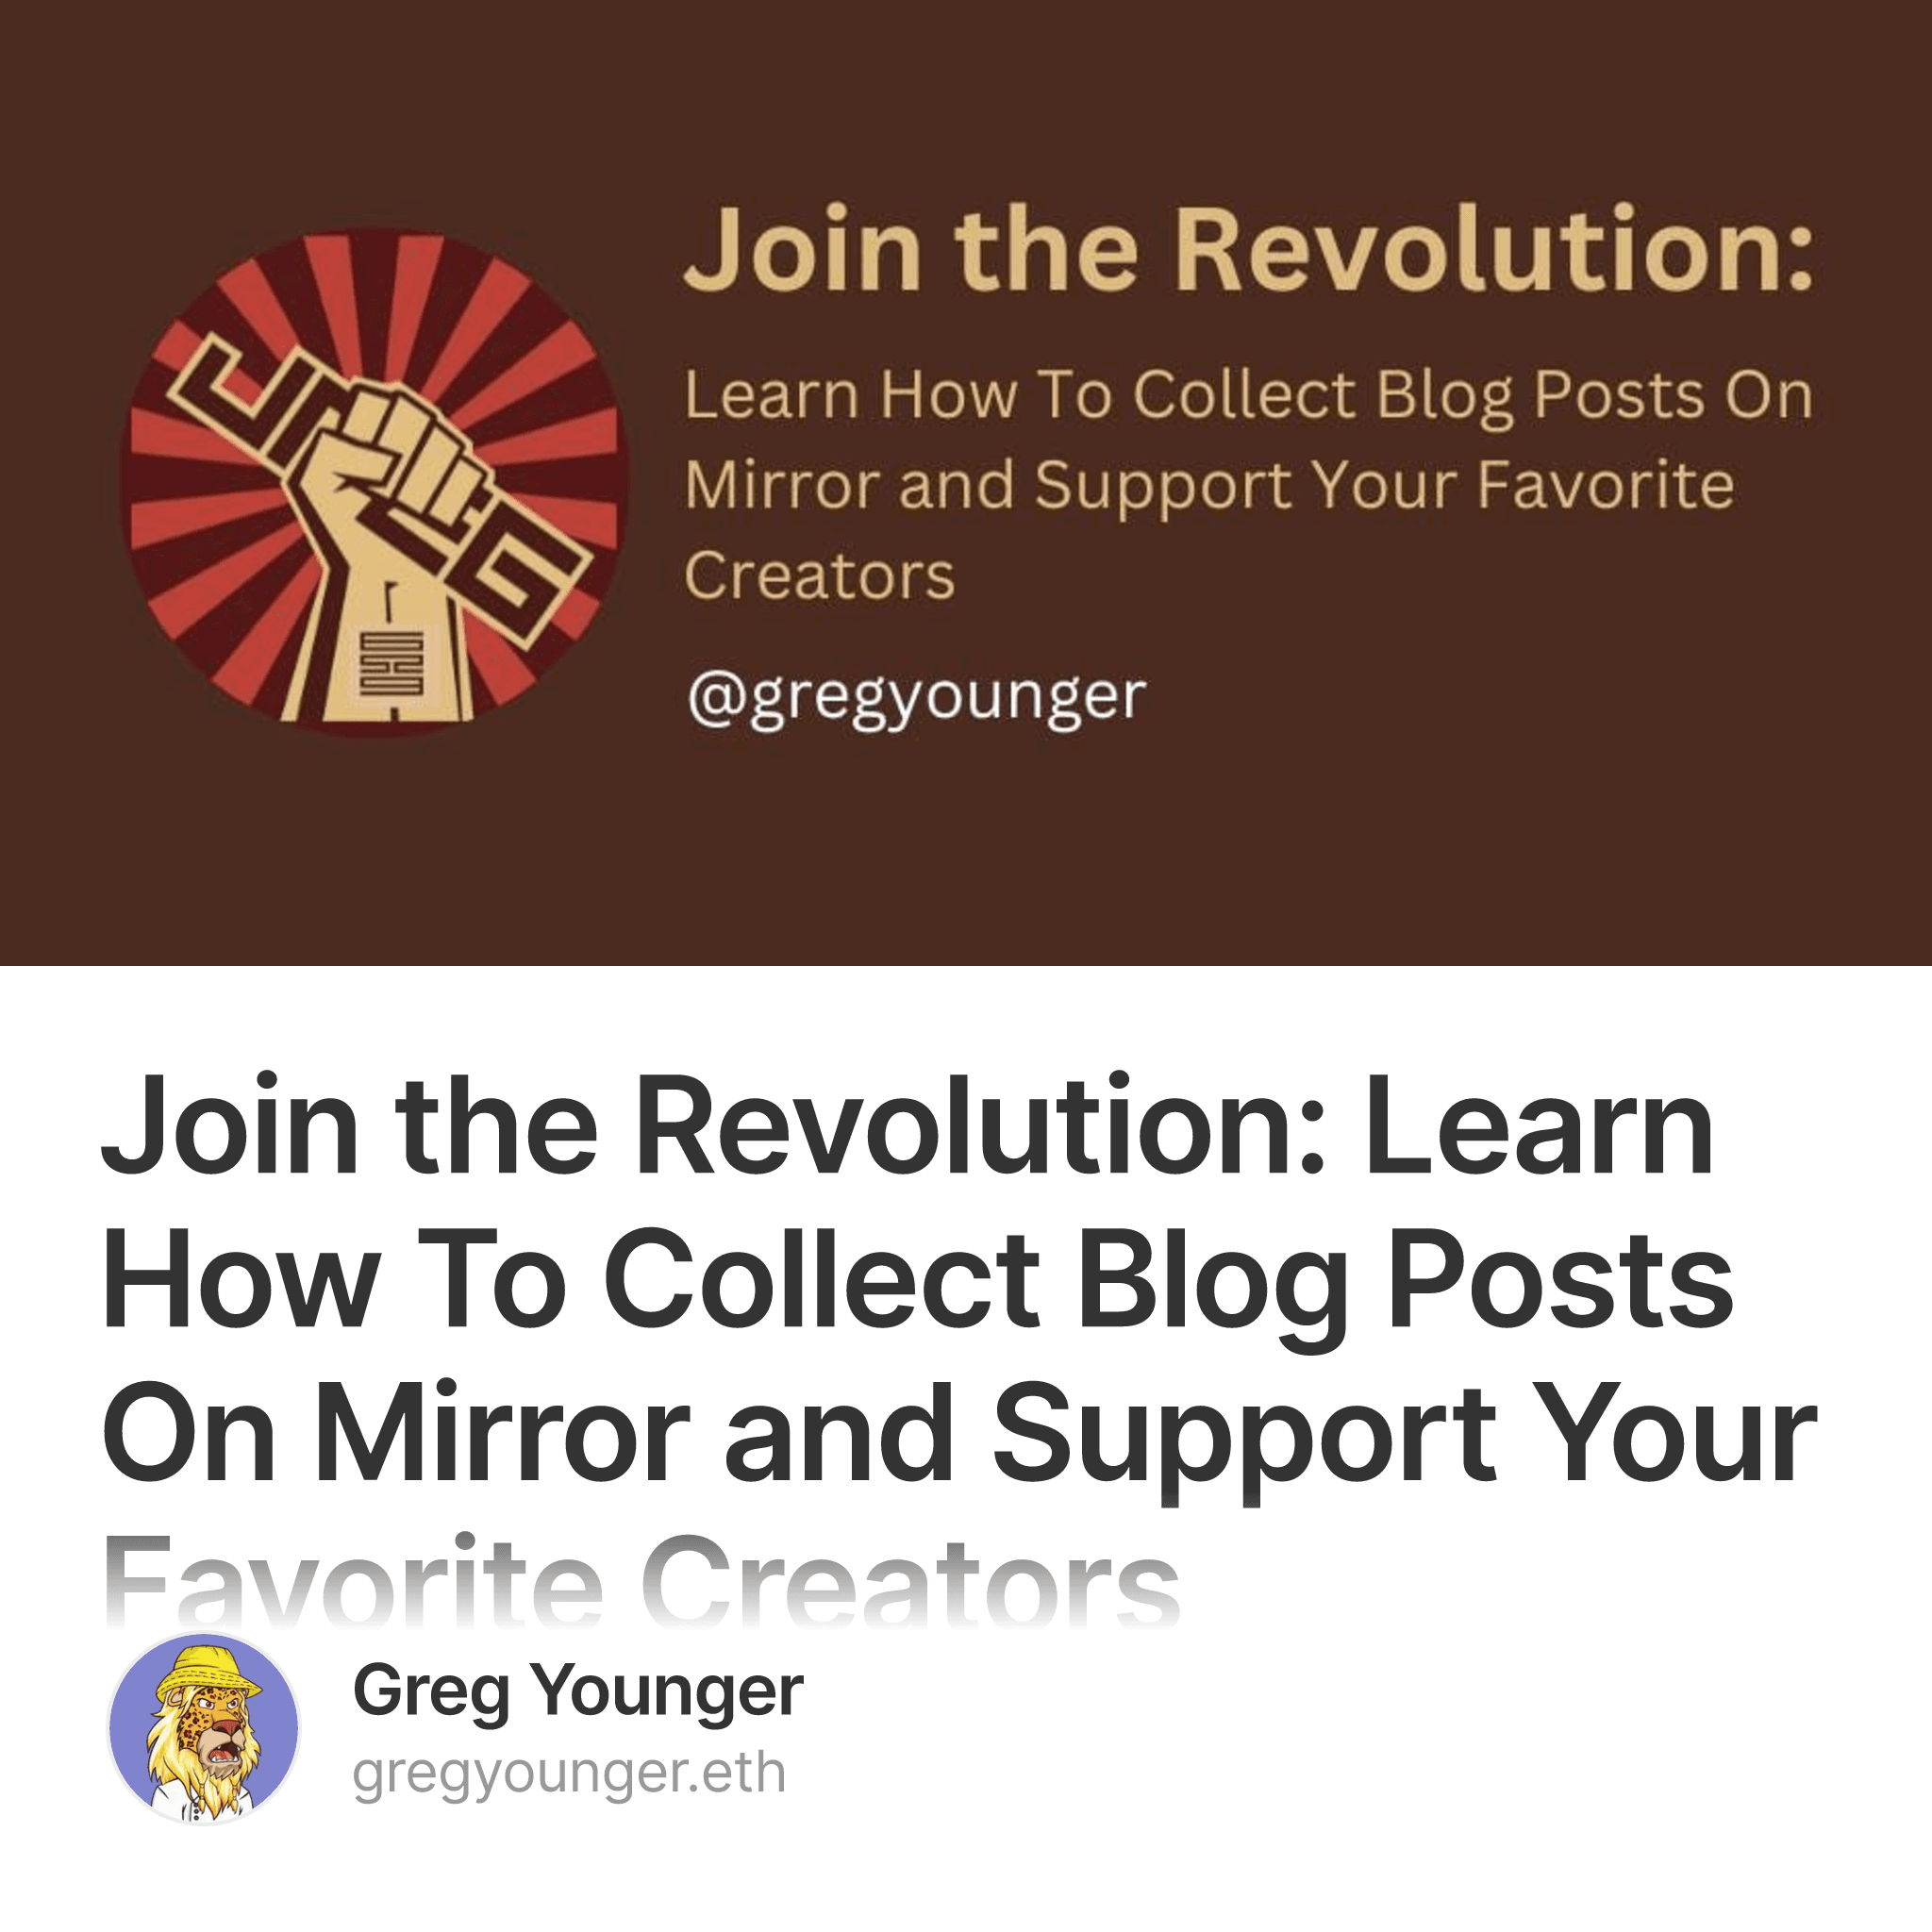 Join the Revolution: Learn How To Collect Blog Posts On Mirror and Support Your Favorite Creators 1/11